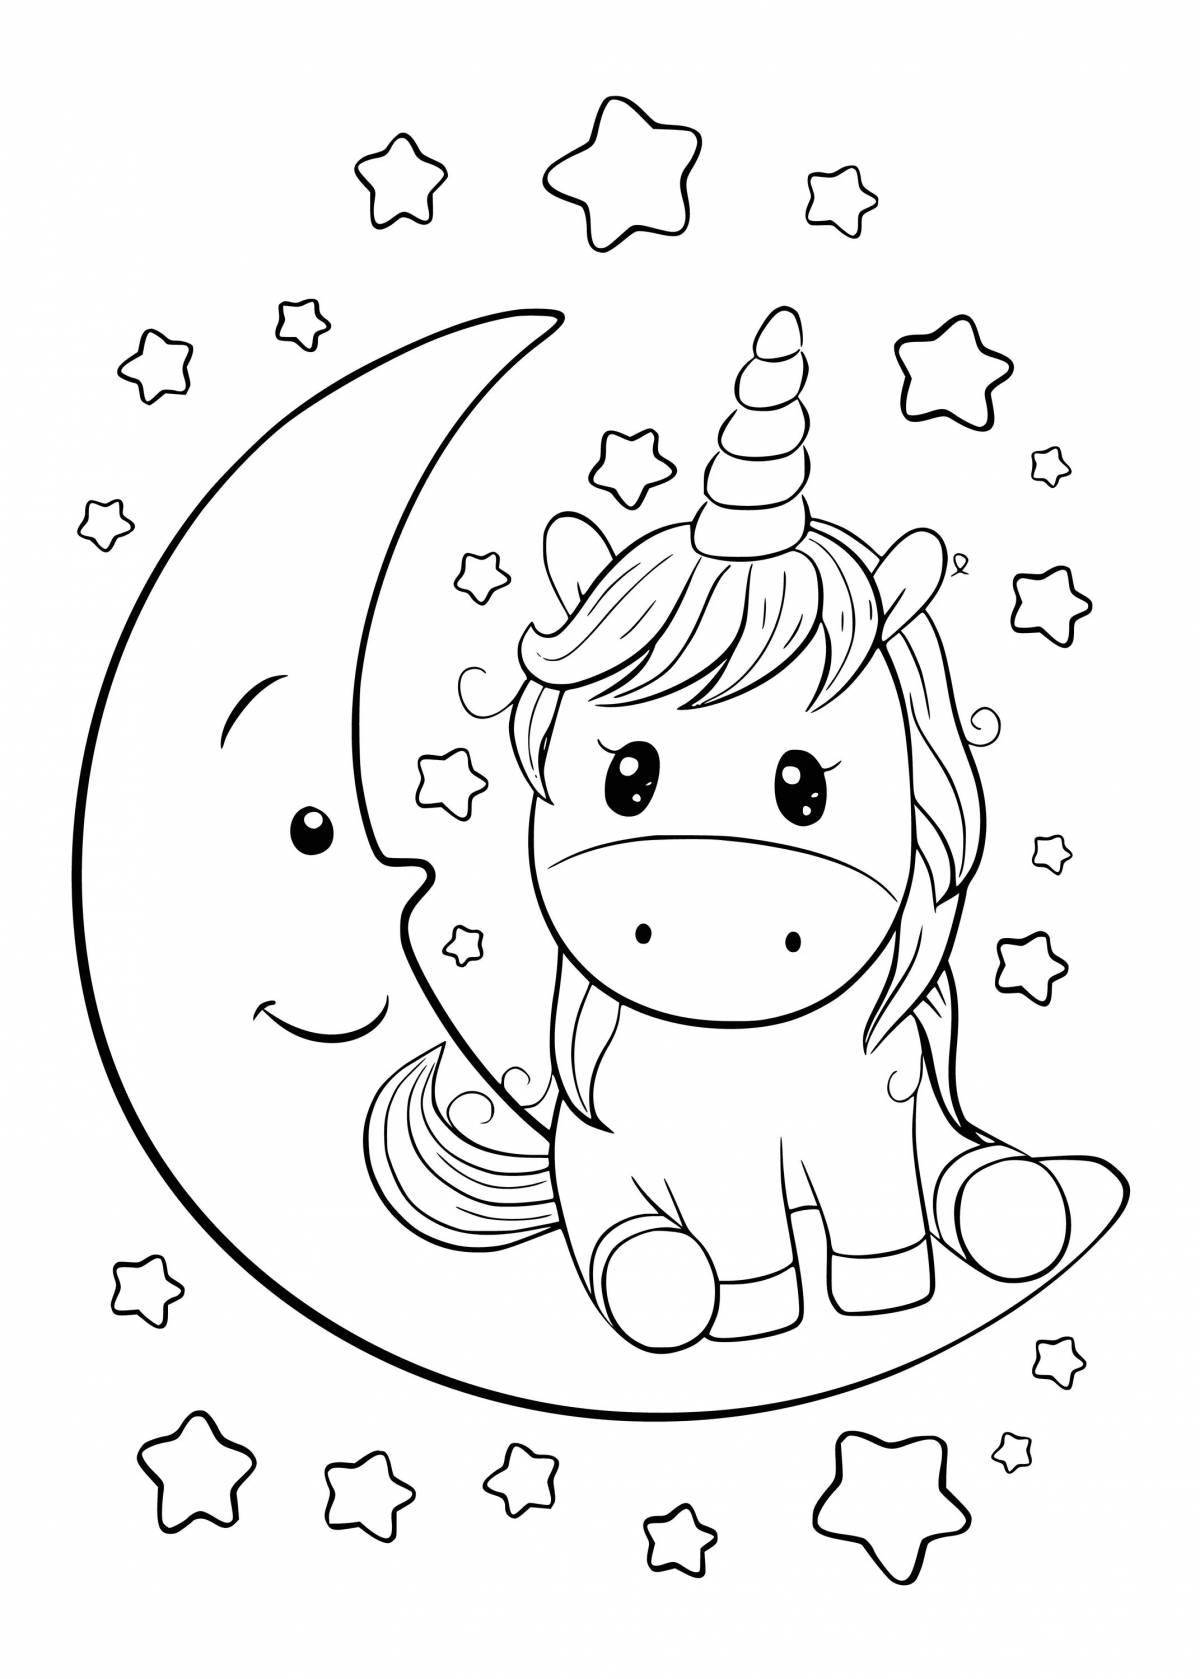 Gorgeous coloring picture of a unicorn